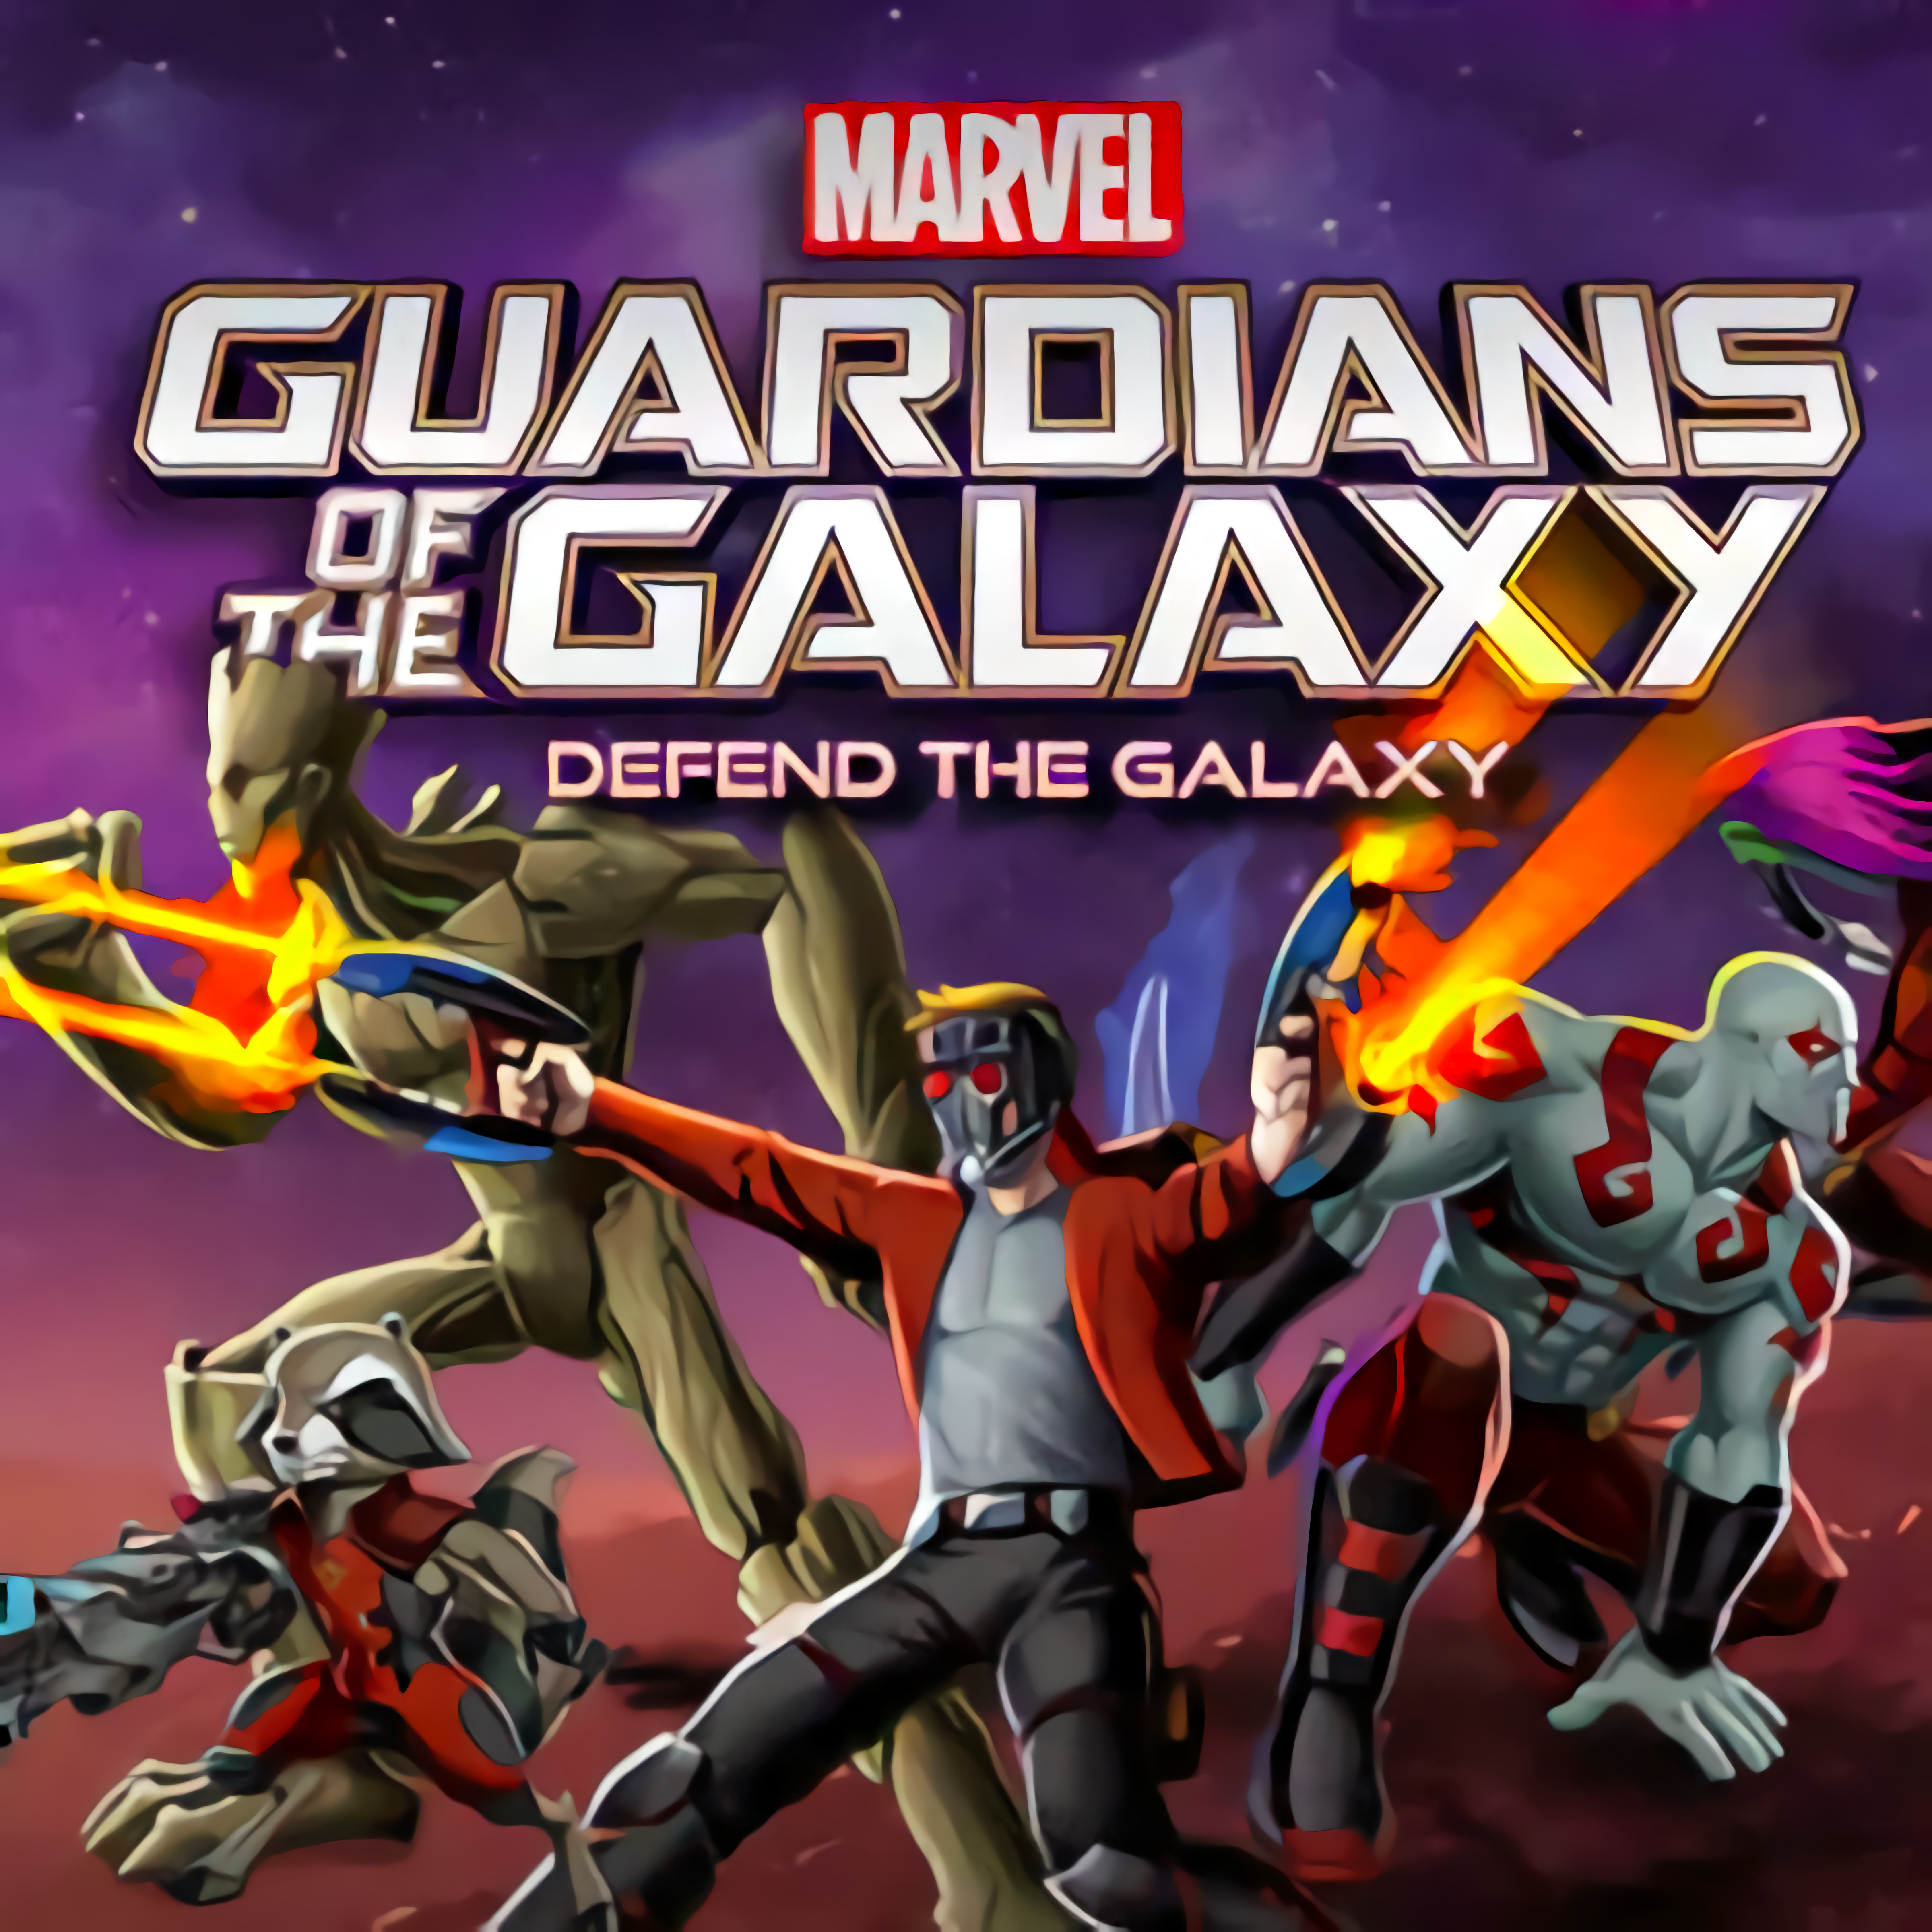 Defend The Galaxy - Guardians of the Galaxy